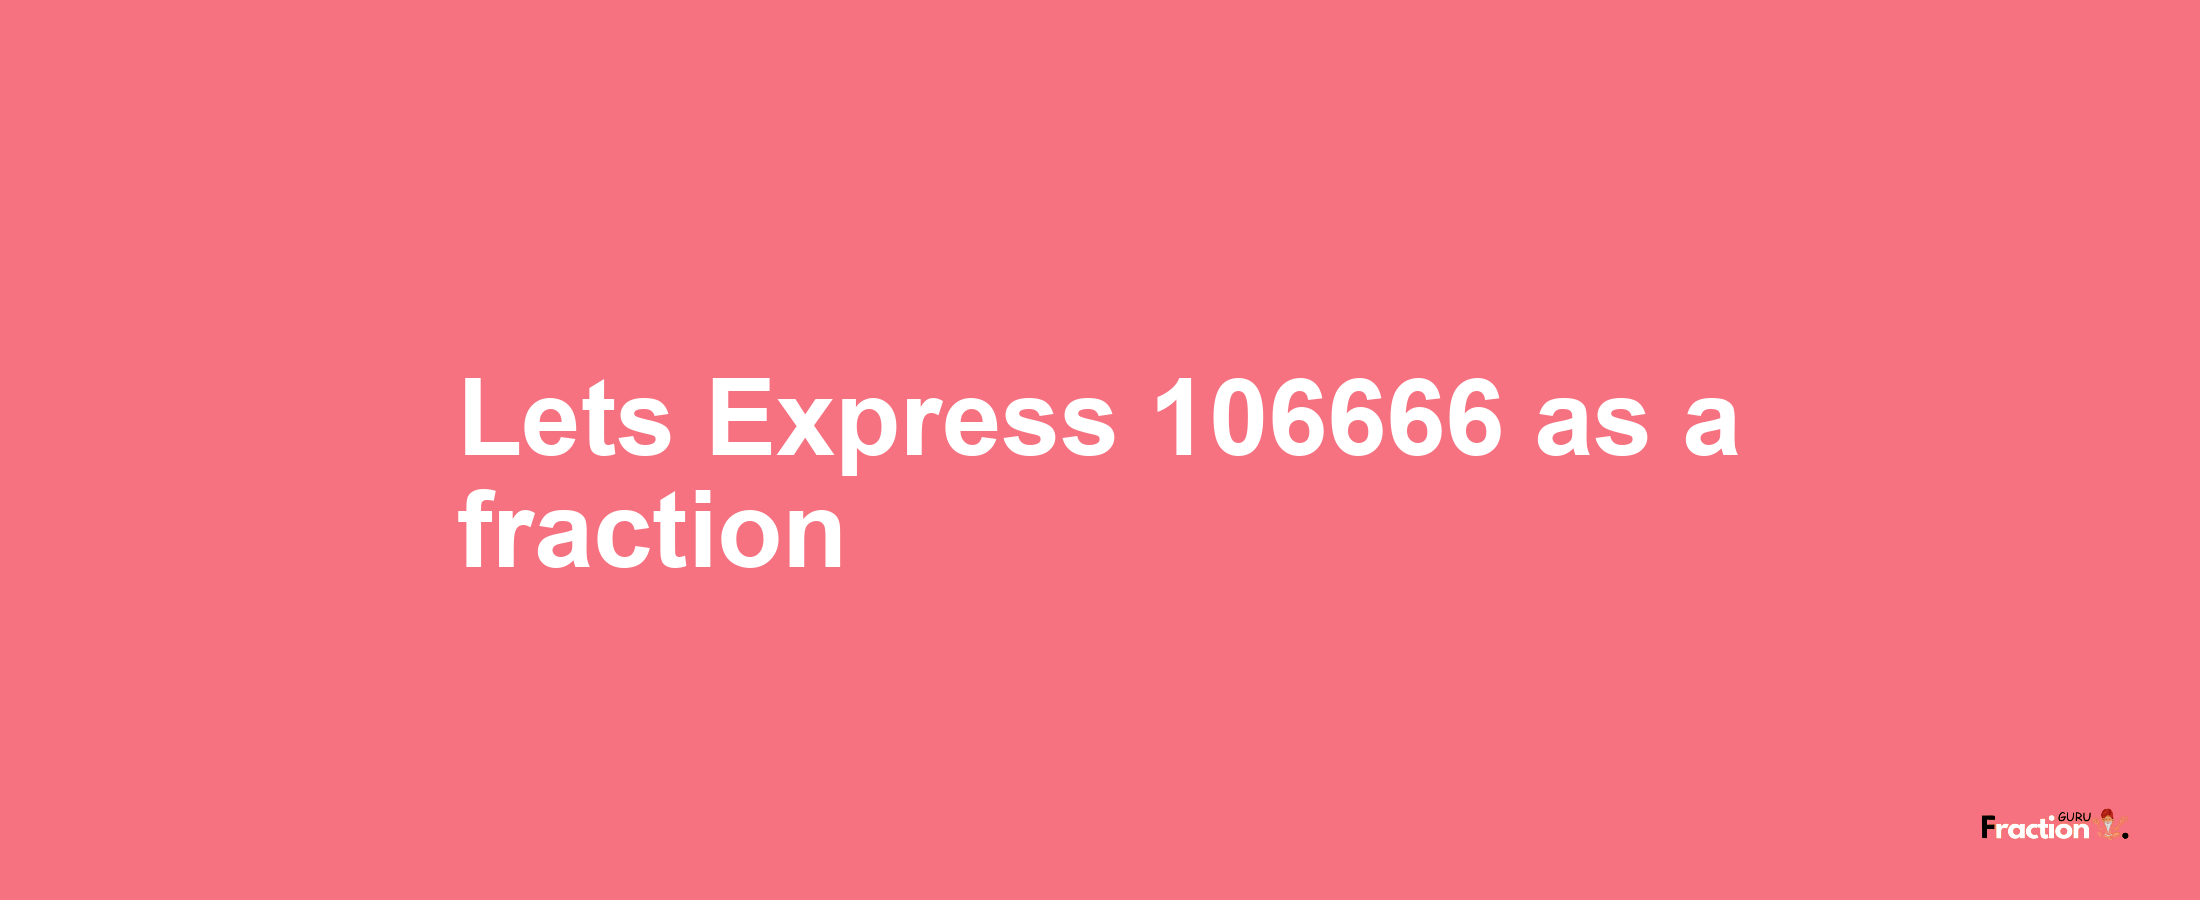 Lets Express 106666 as afraction